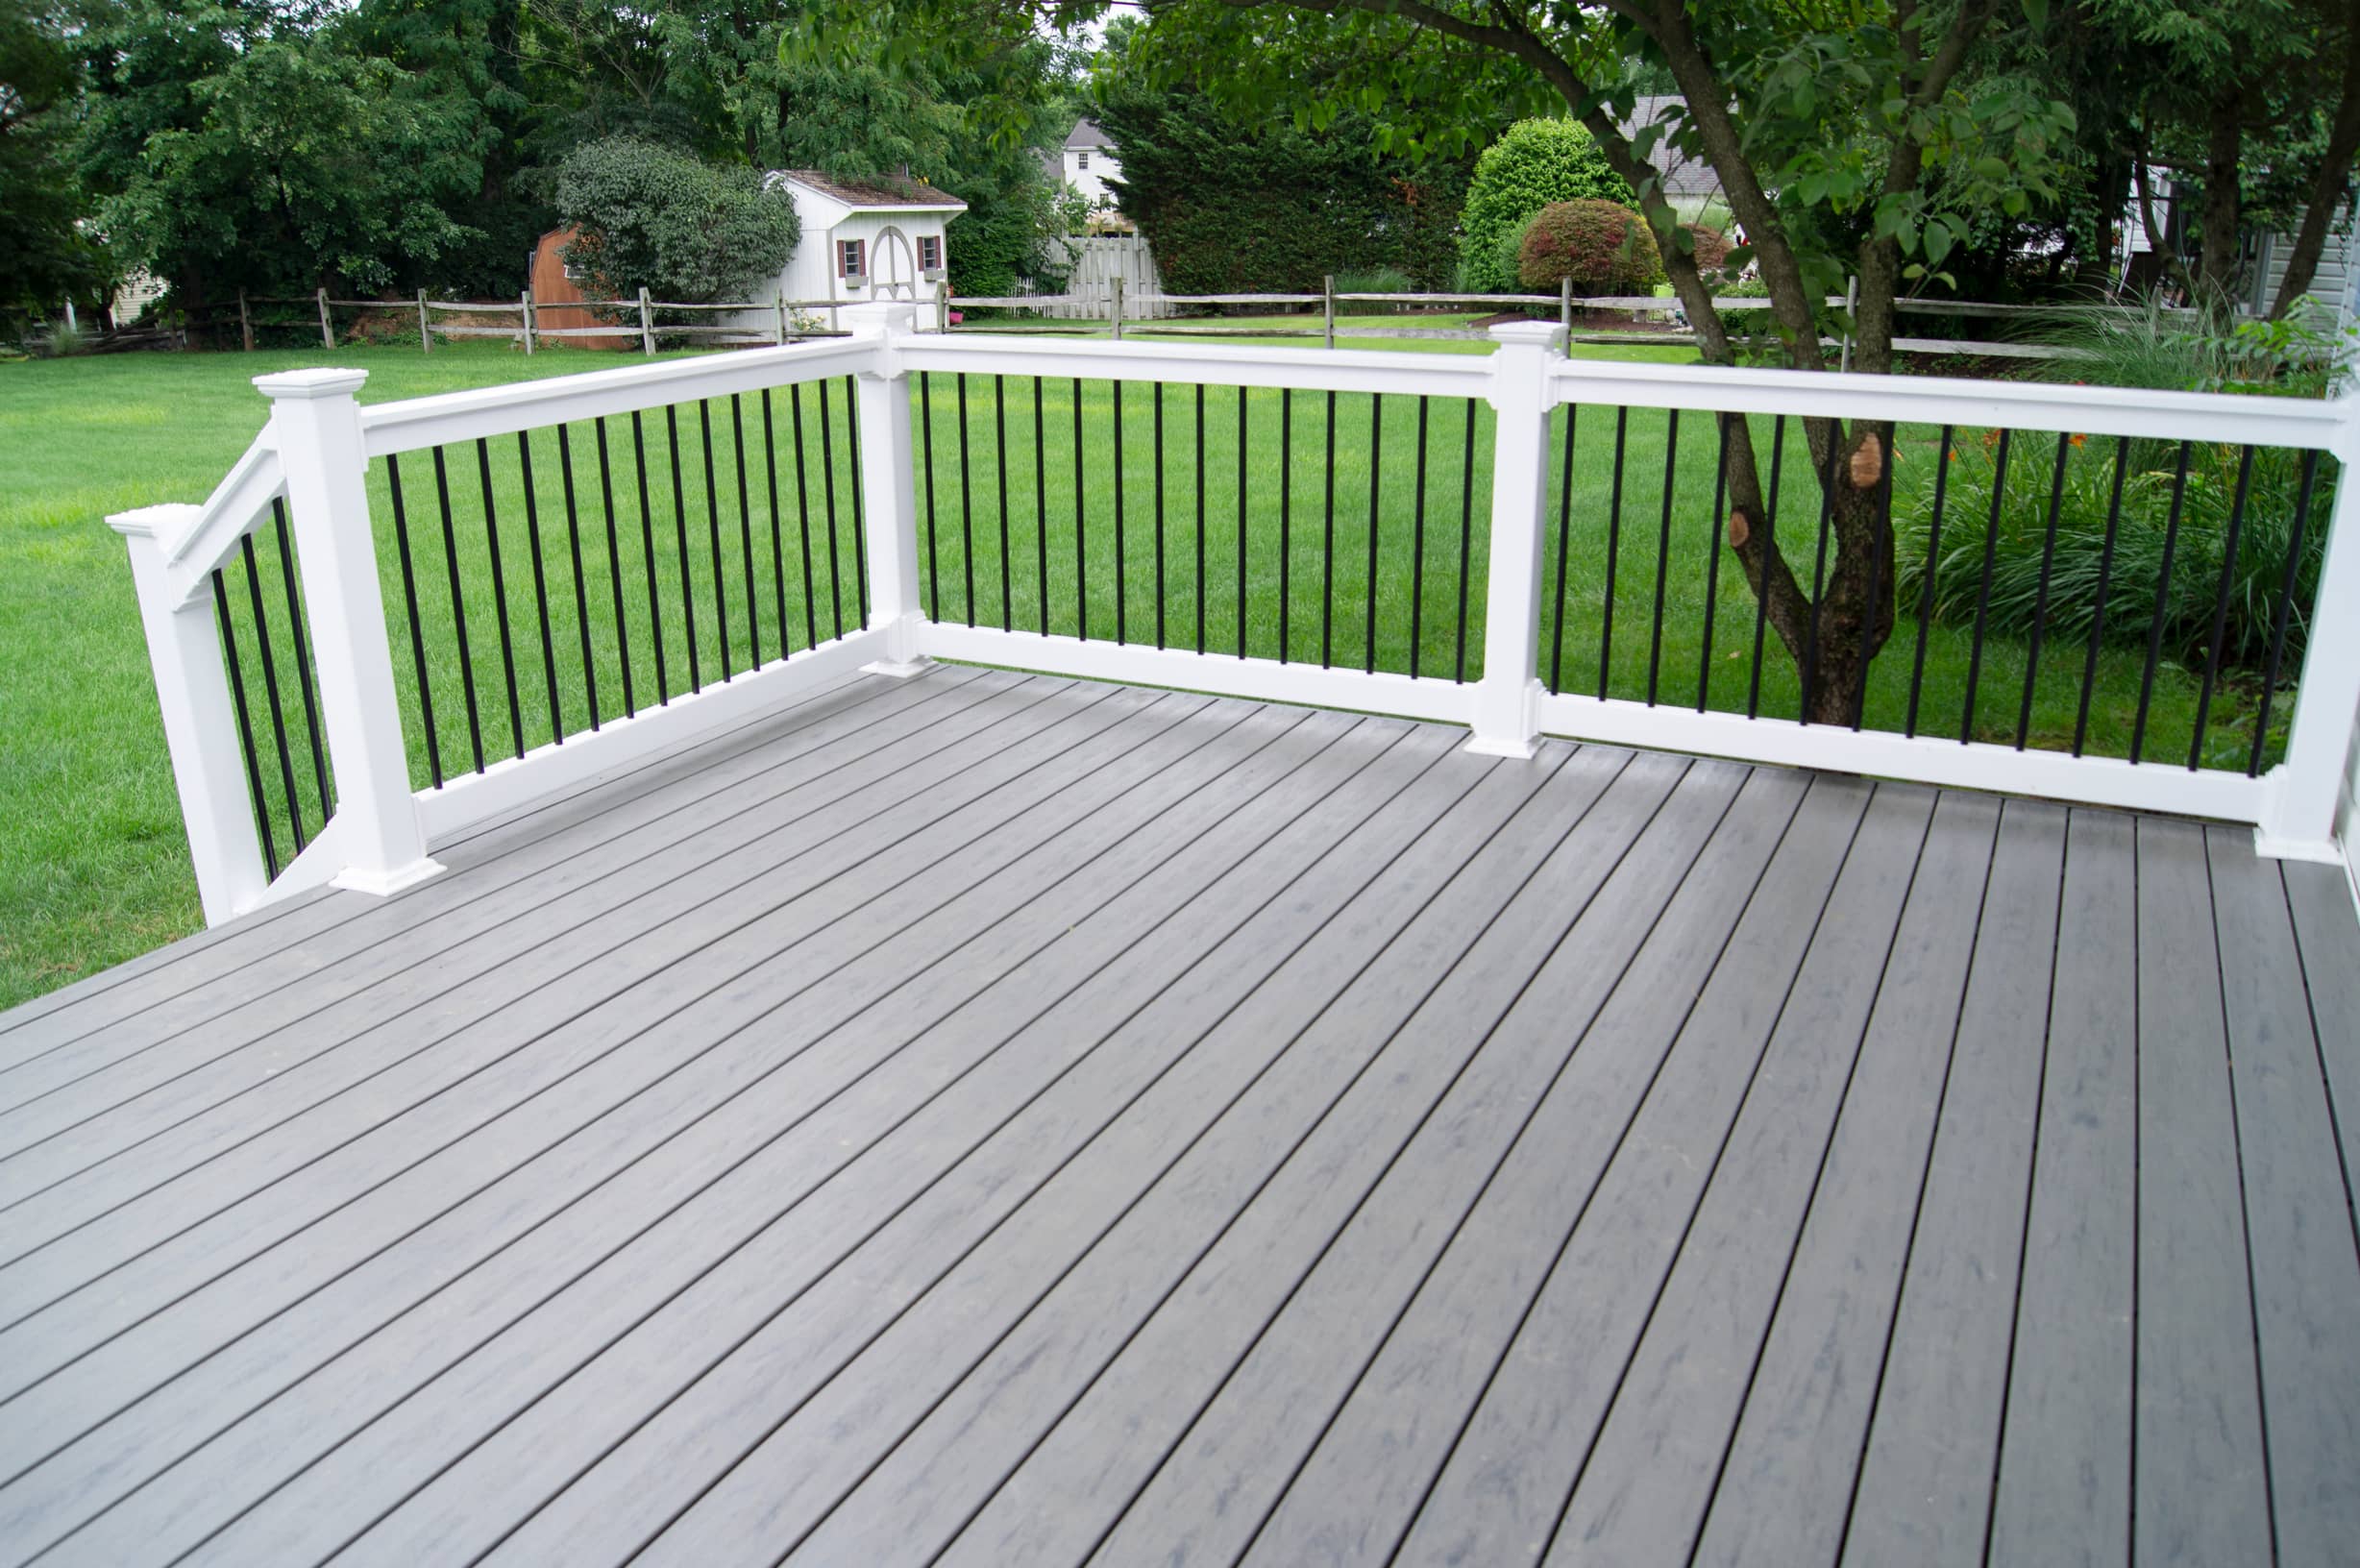 This image is of a gray deck with white railing next to a backyard lawn for a home.